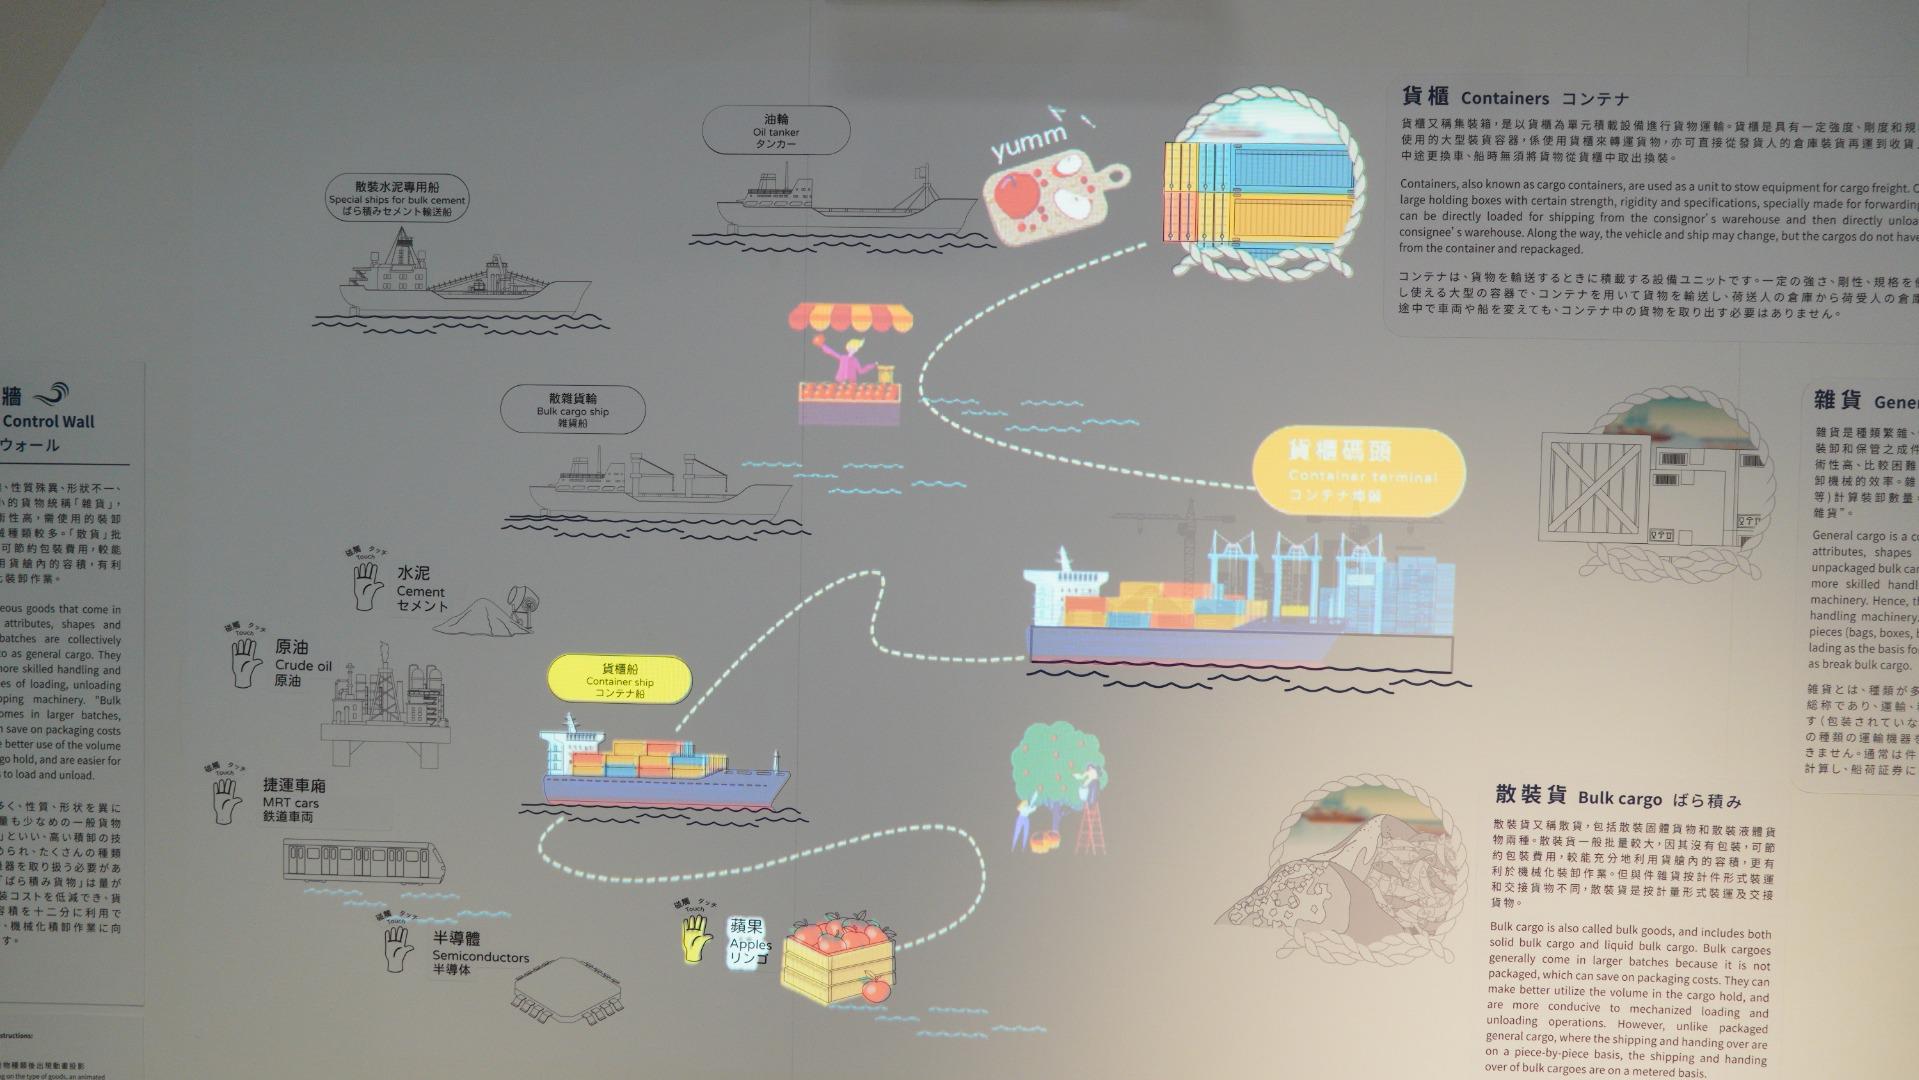 Keelung Port History Museum, Curation, Exhibition Planning, Exhibition Design, Interactive Exhibition, Wang Yi Design